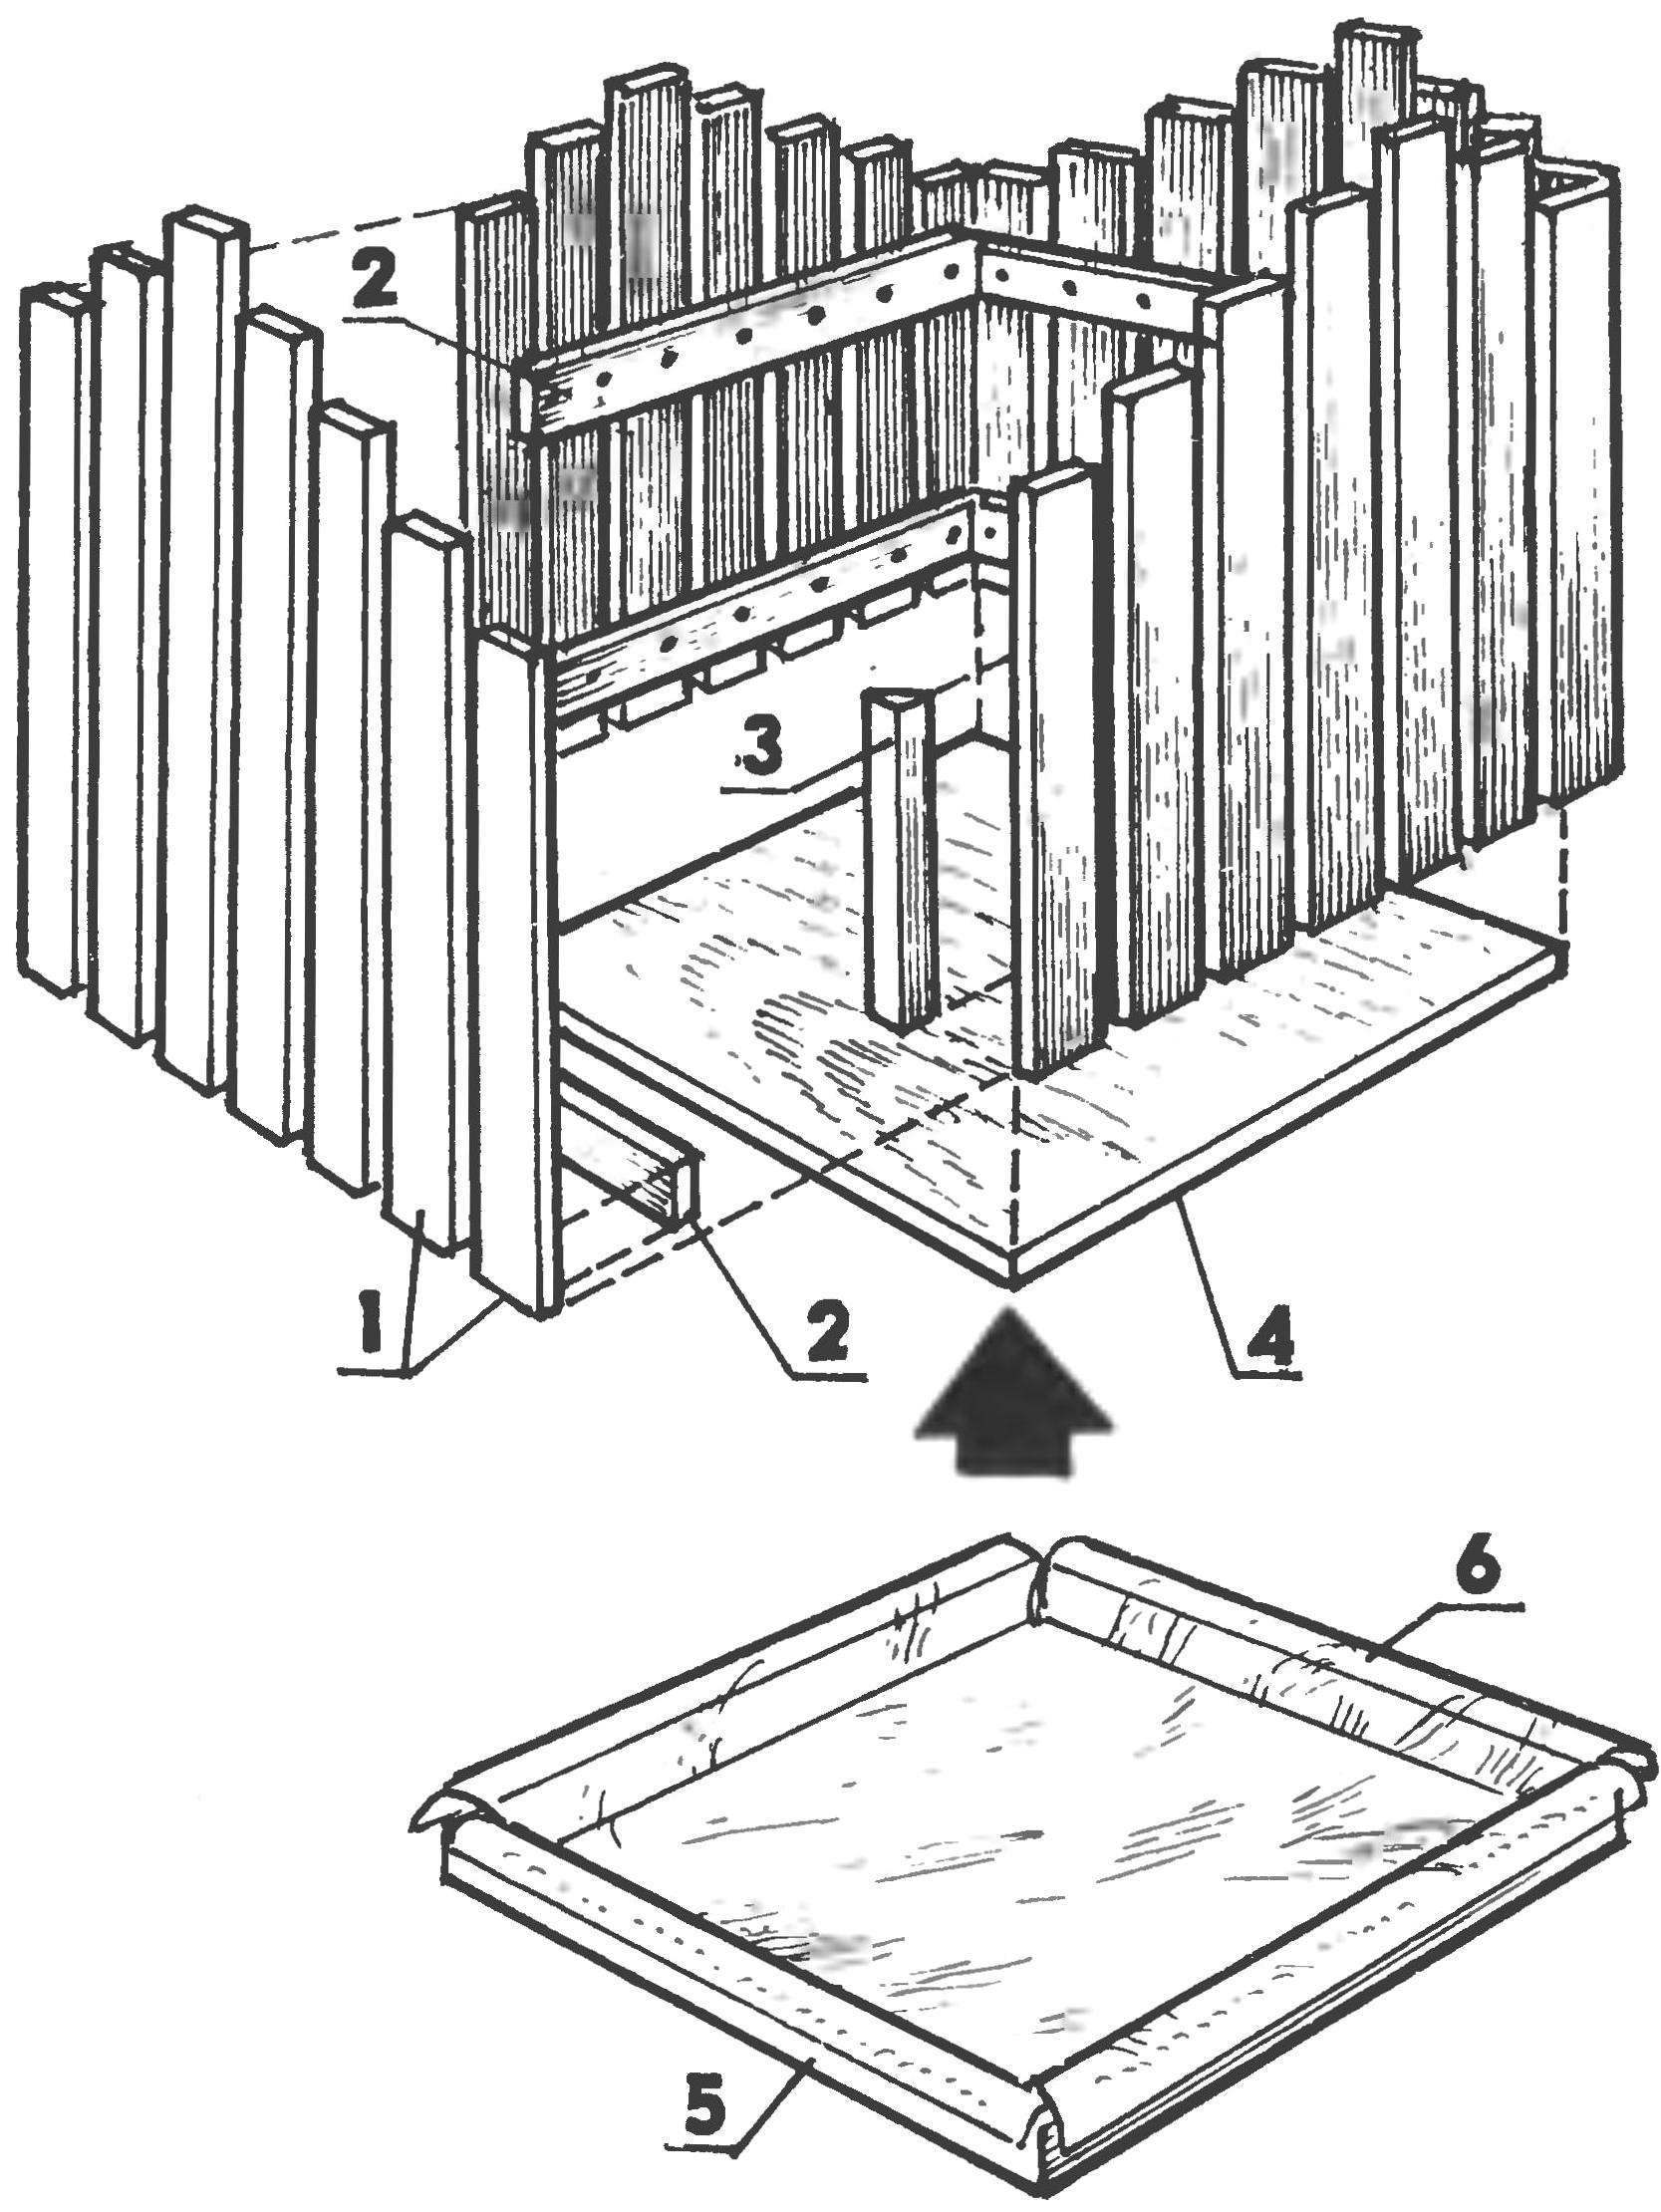 Fig. 1. The main parts of the fence